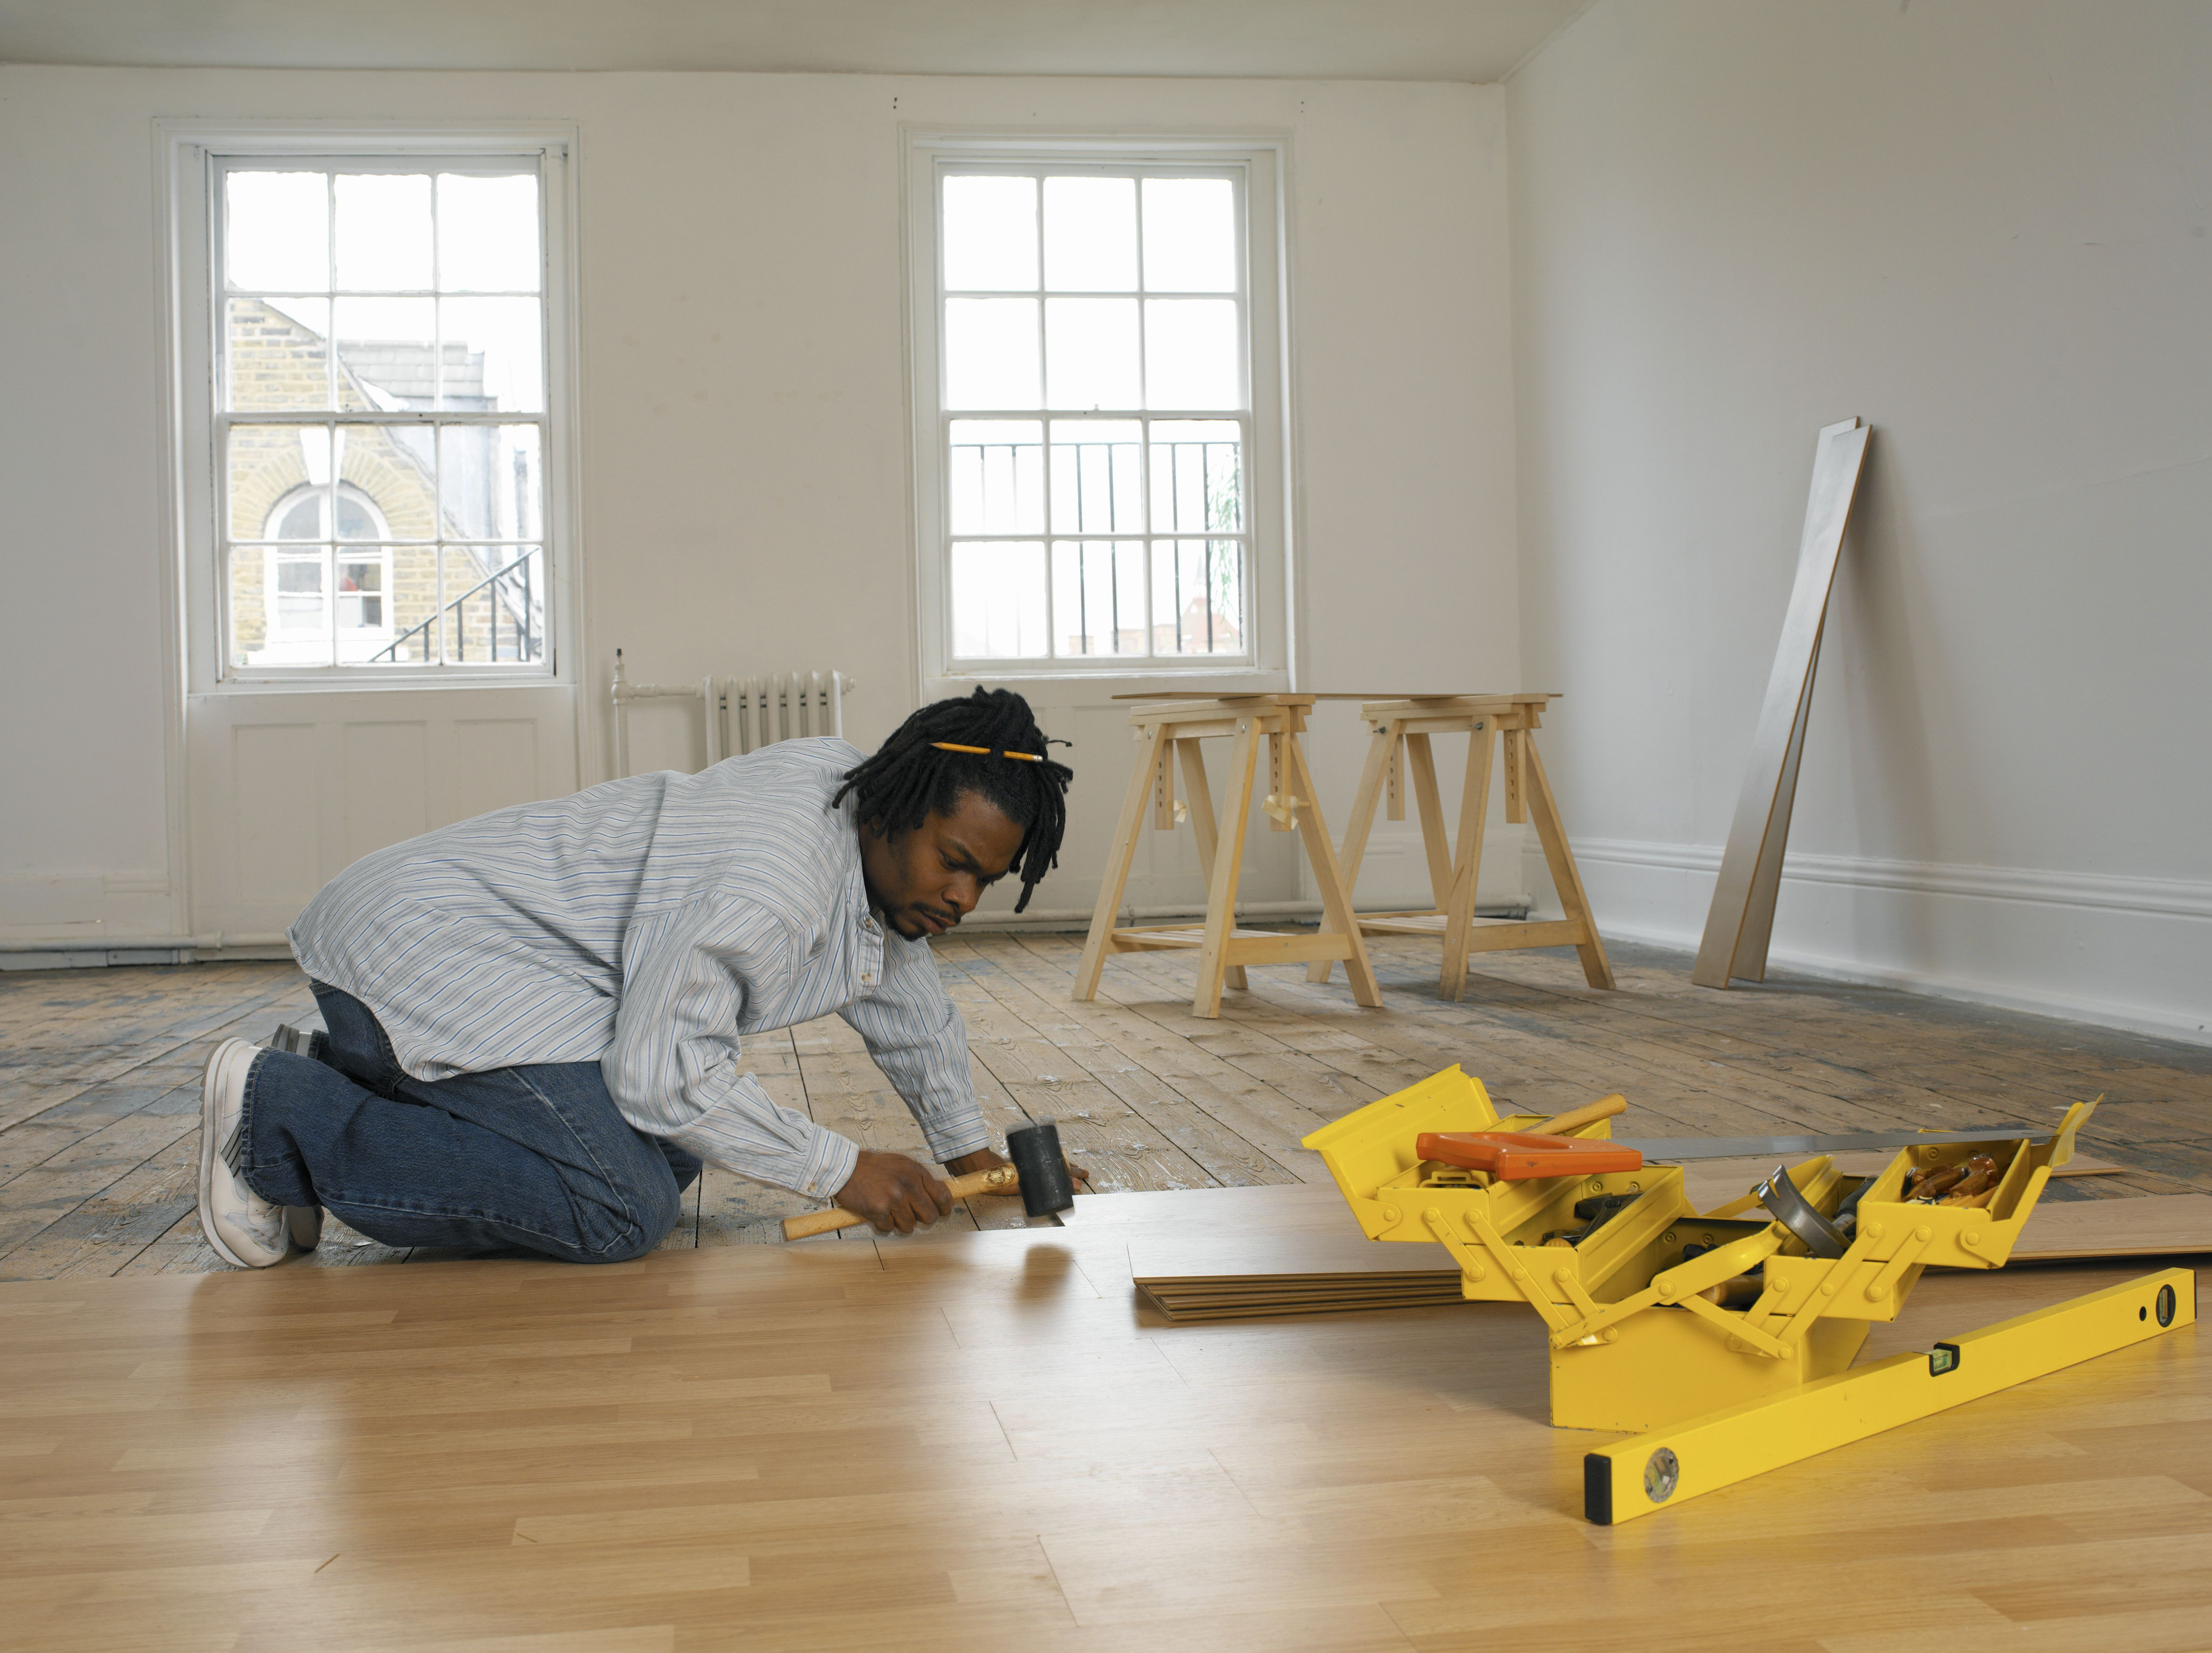 hardwood flooring brisbane prices of ikea flooring review overview with regard to young man laying floor 200199826 001 57e96a973df78c690f719440